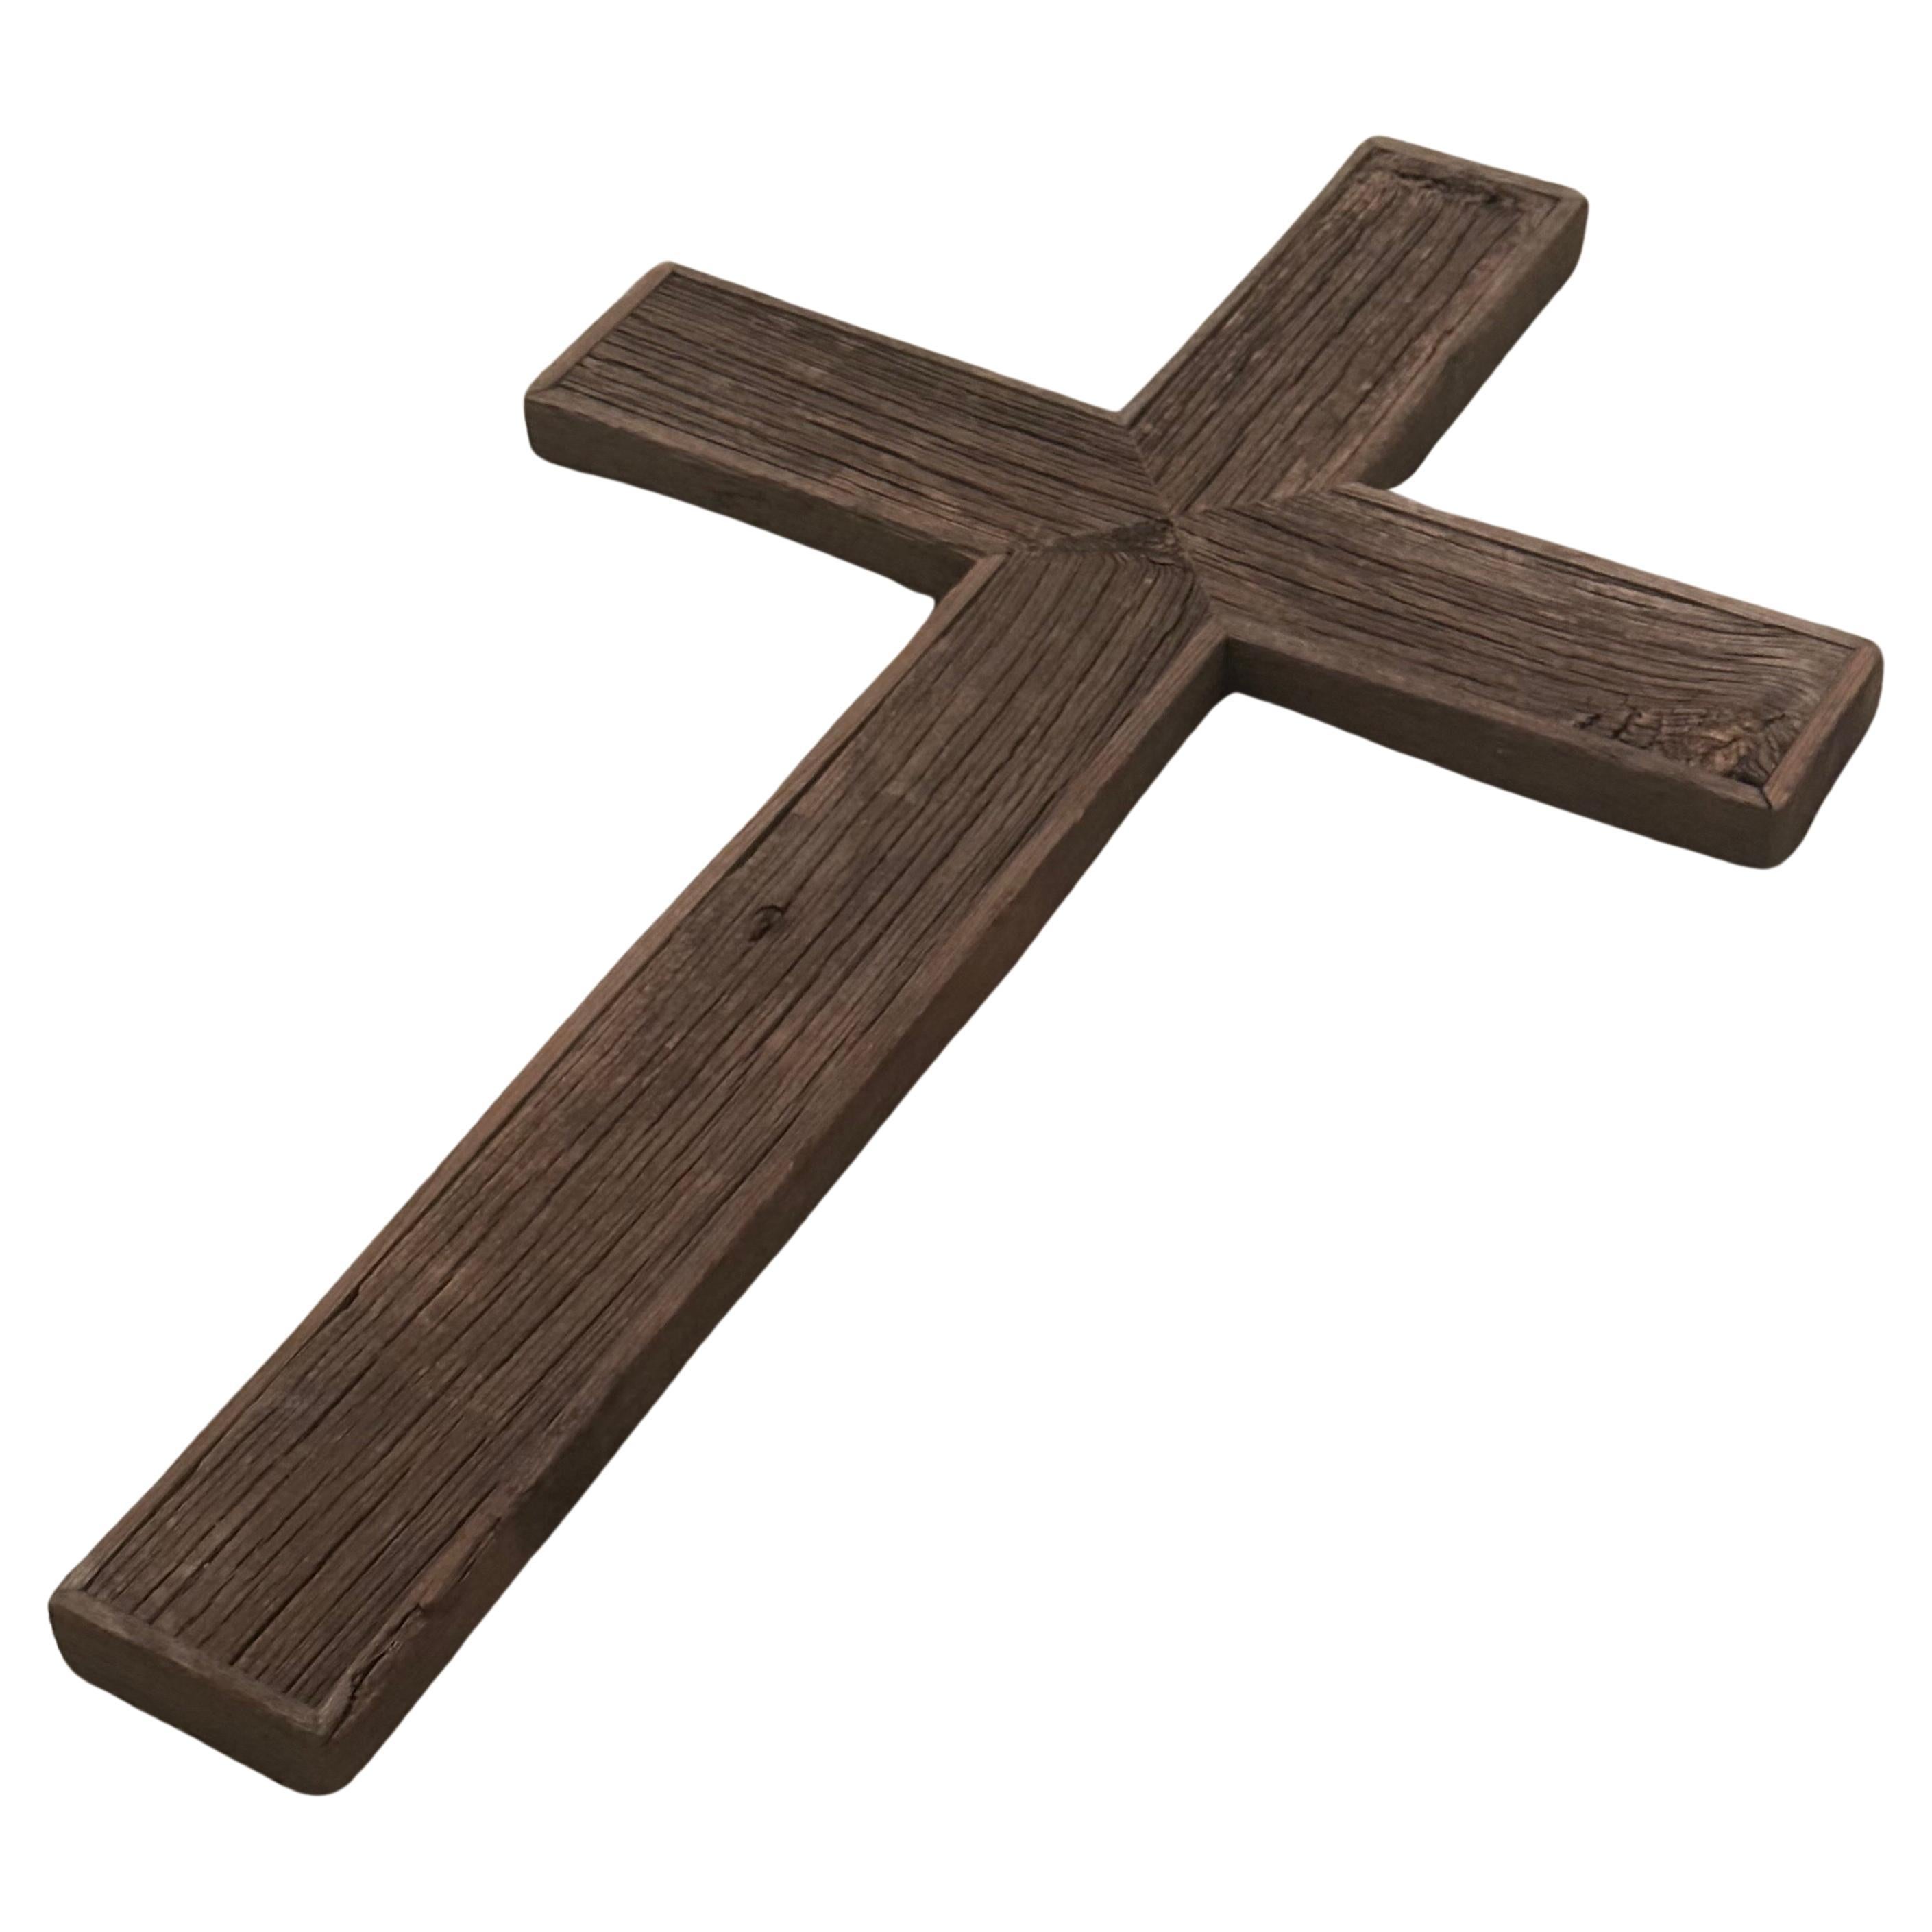 Large rustic driftwood cross, circa 2000s. The piece measures 15